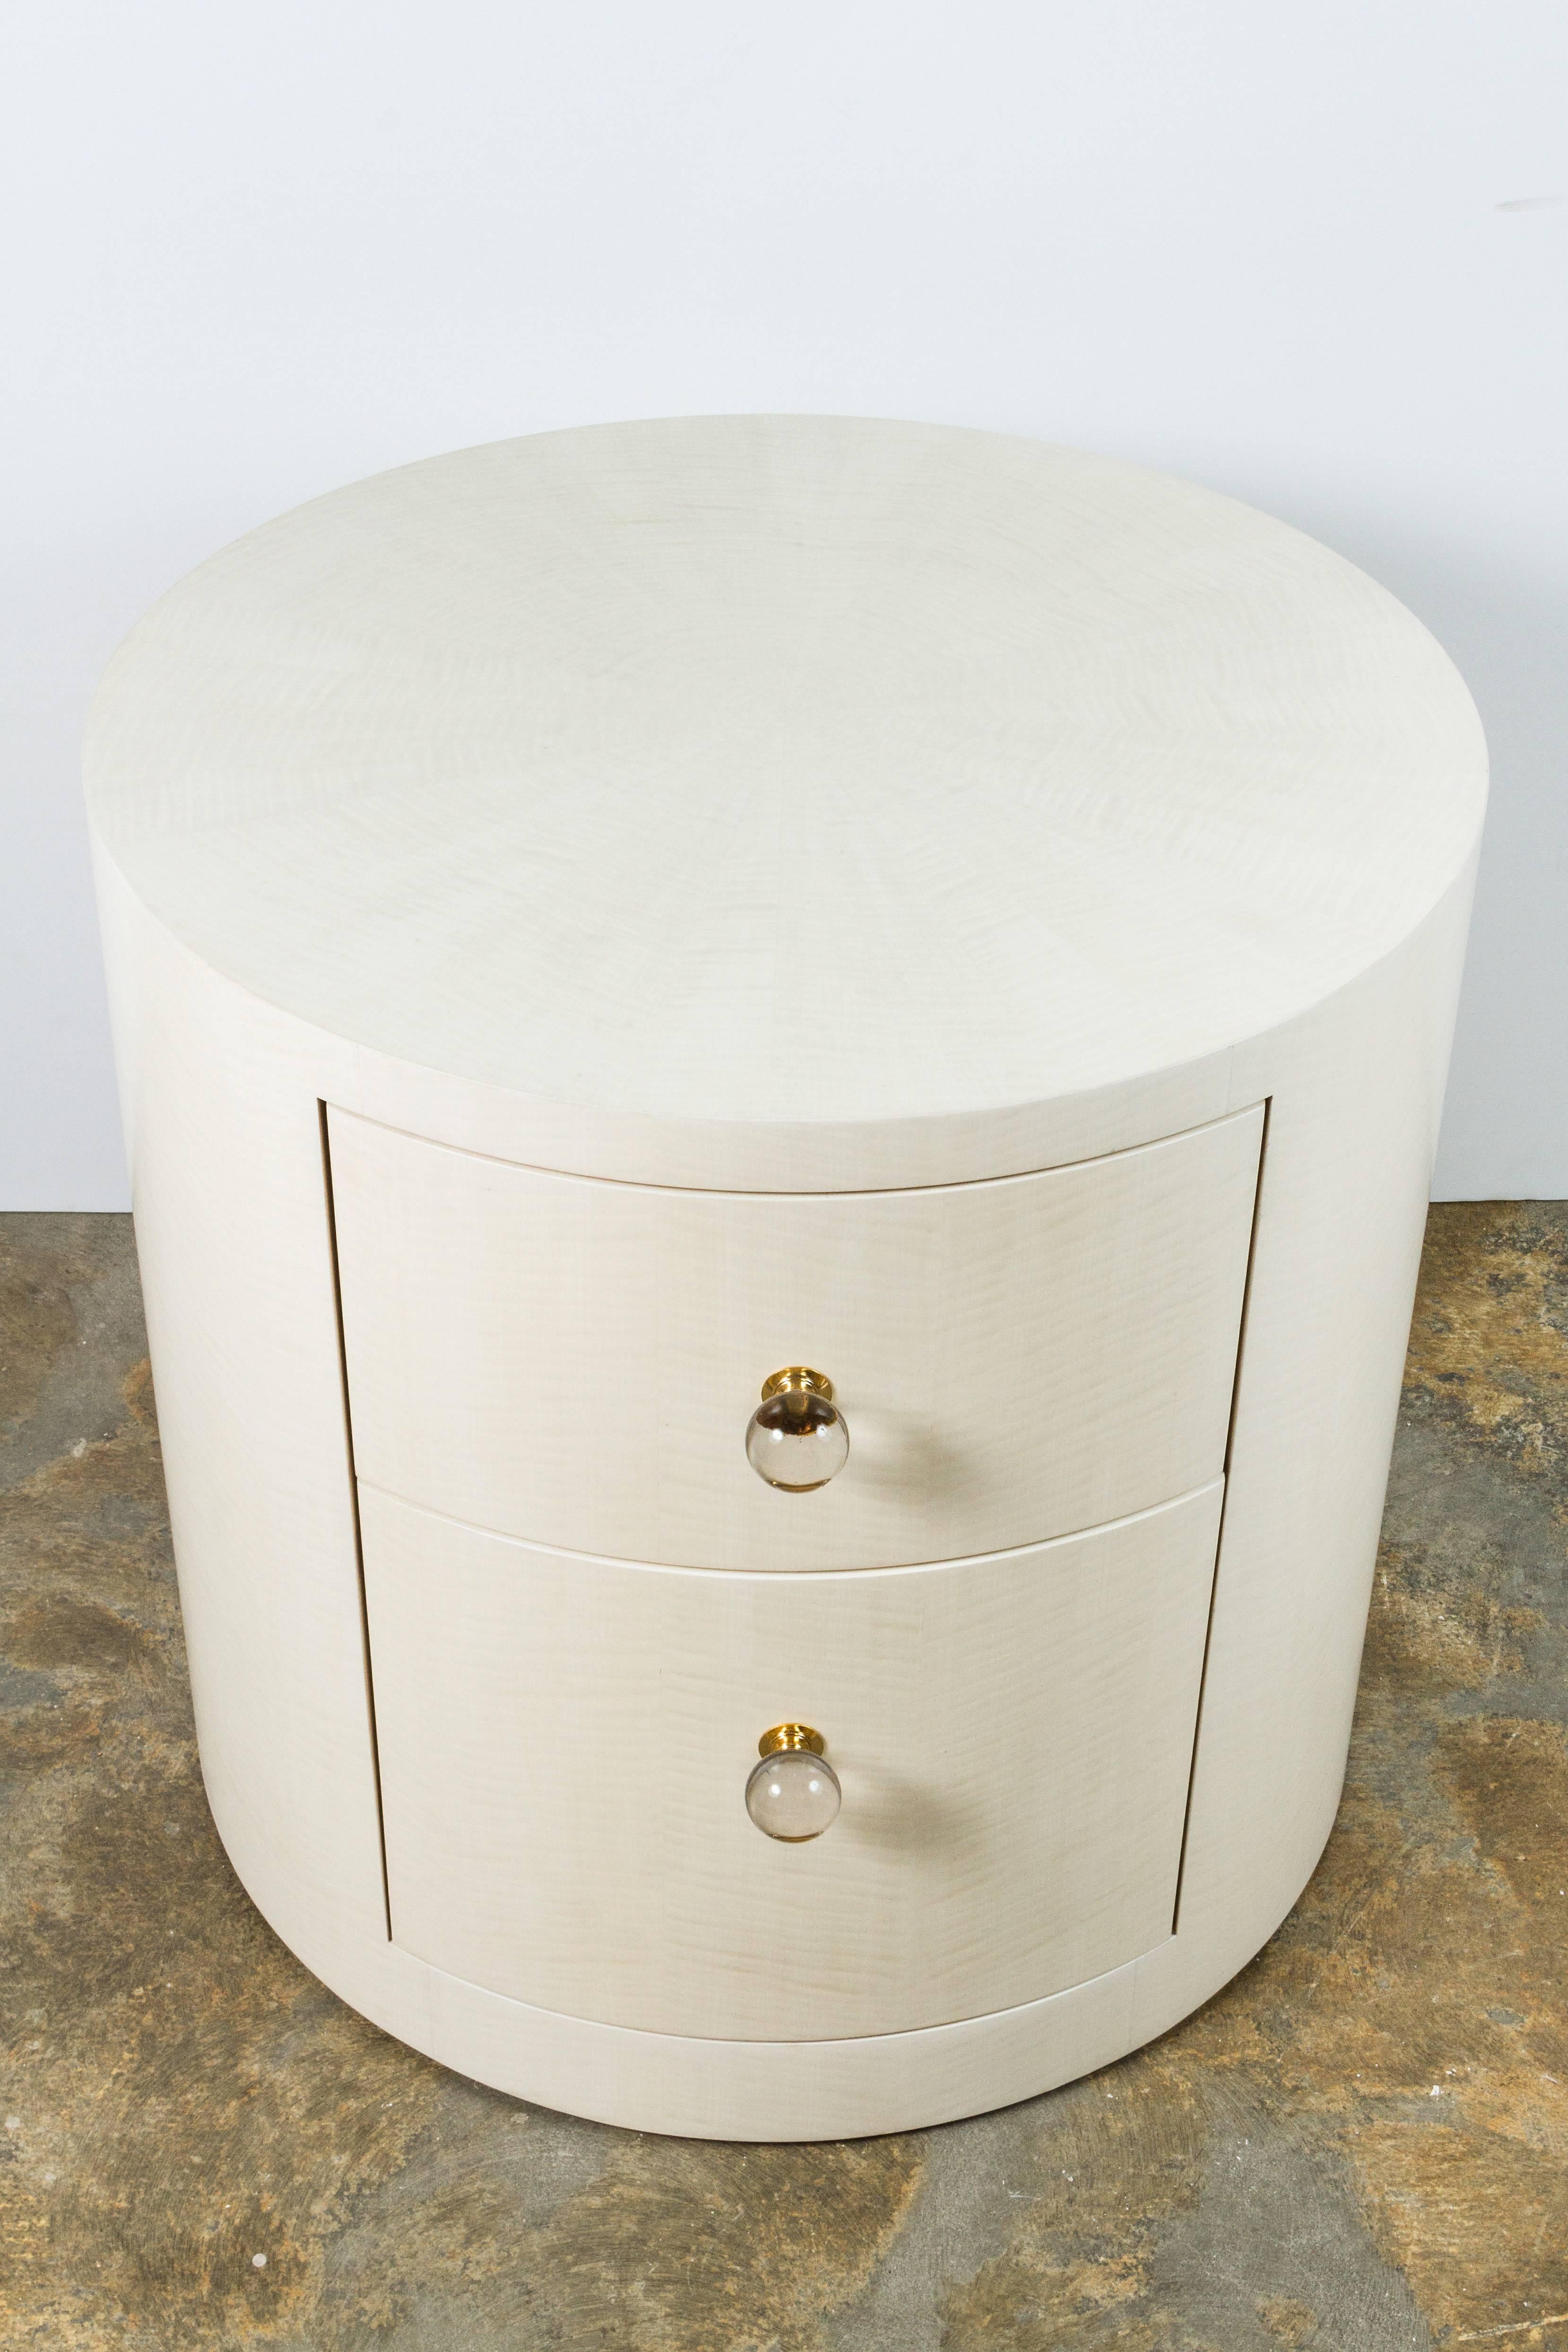 Paul Marra Italian-inspired 1970s style contemporary round nightstand or side table. Bleached maple,  starburst inlay, (shown with vintage crystal gold-plated knobs that are no longer available). By order. Price quoted is per each.  If specifying a